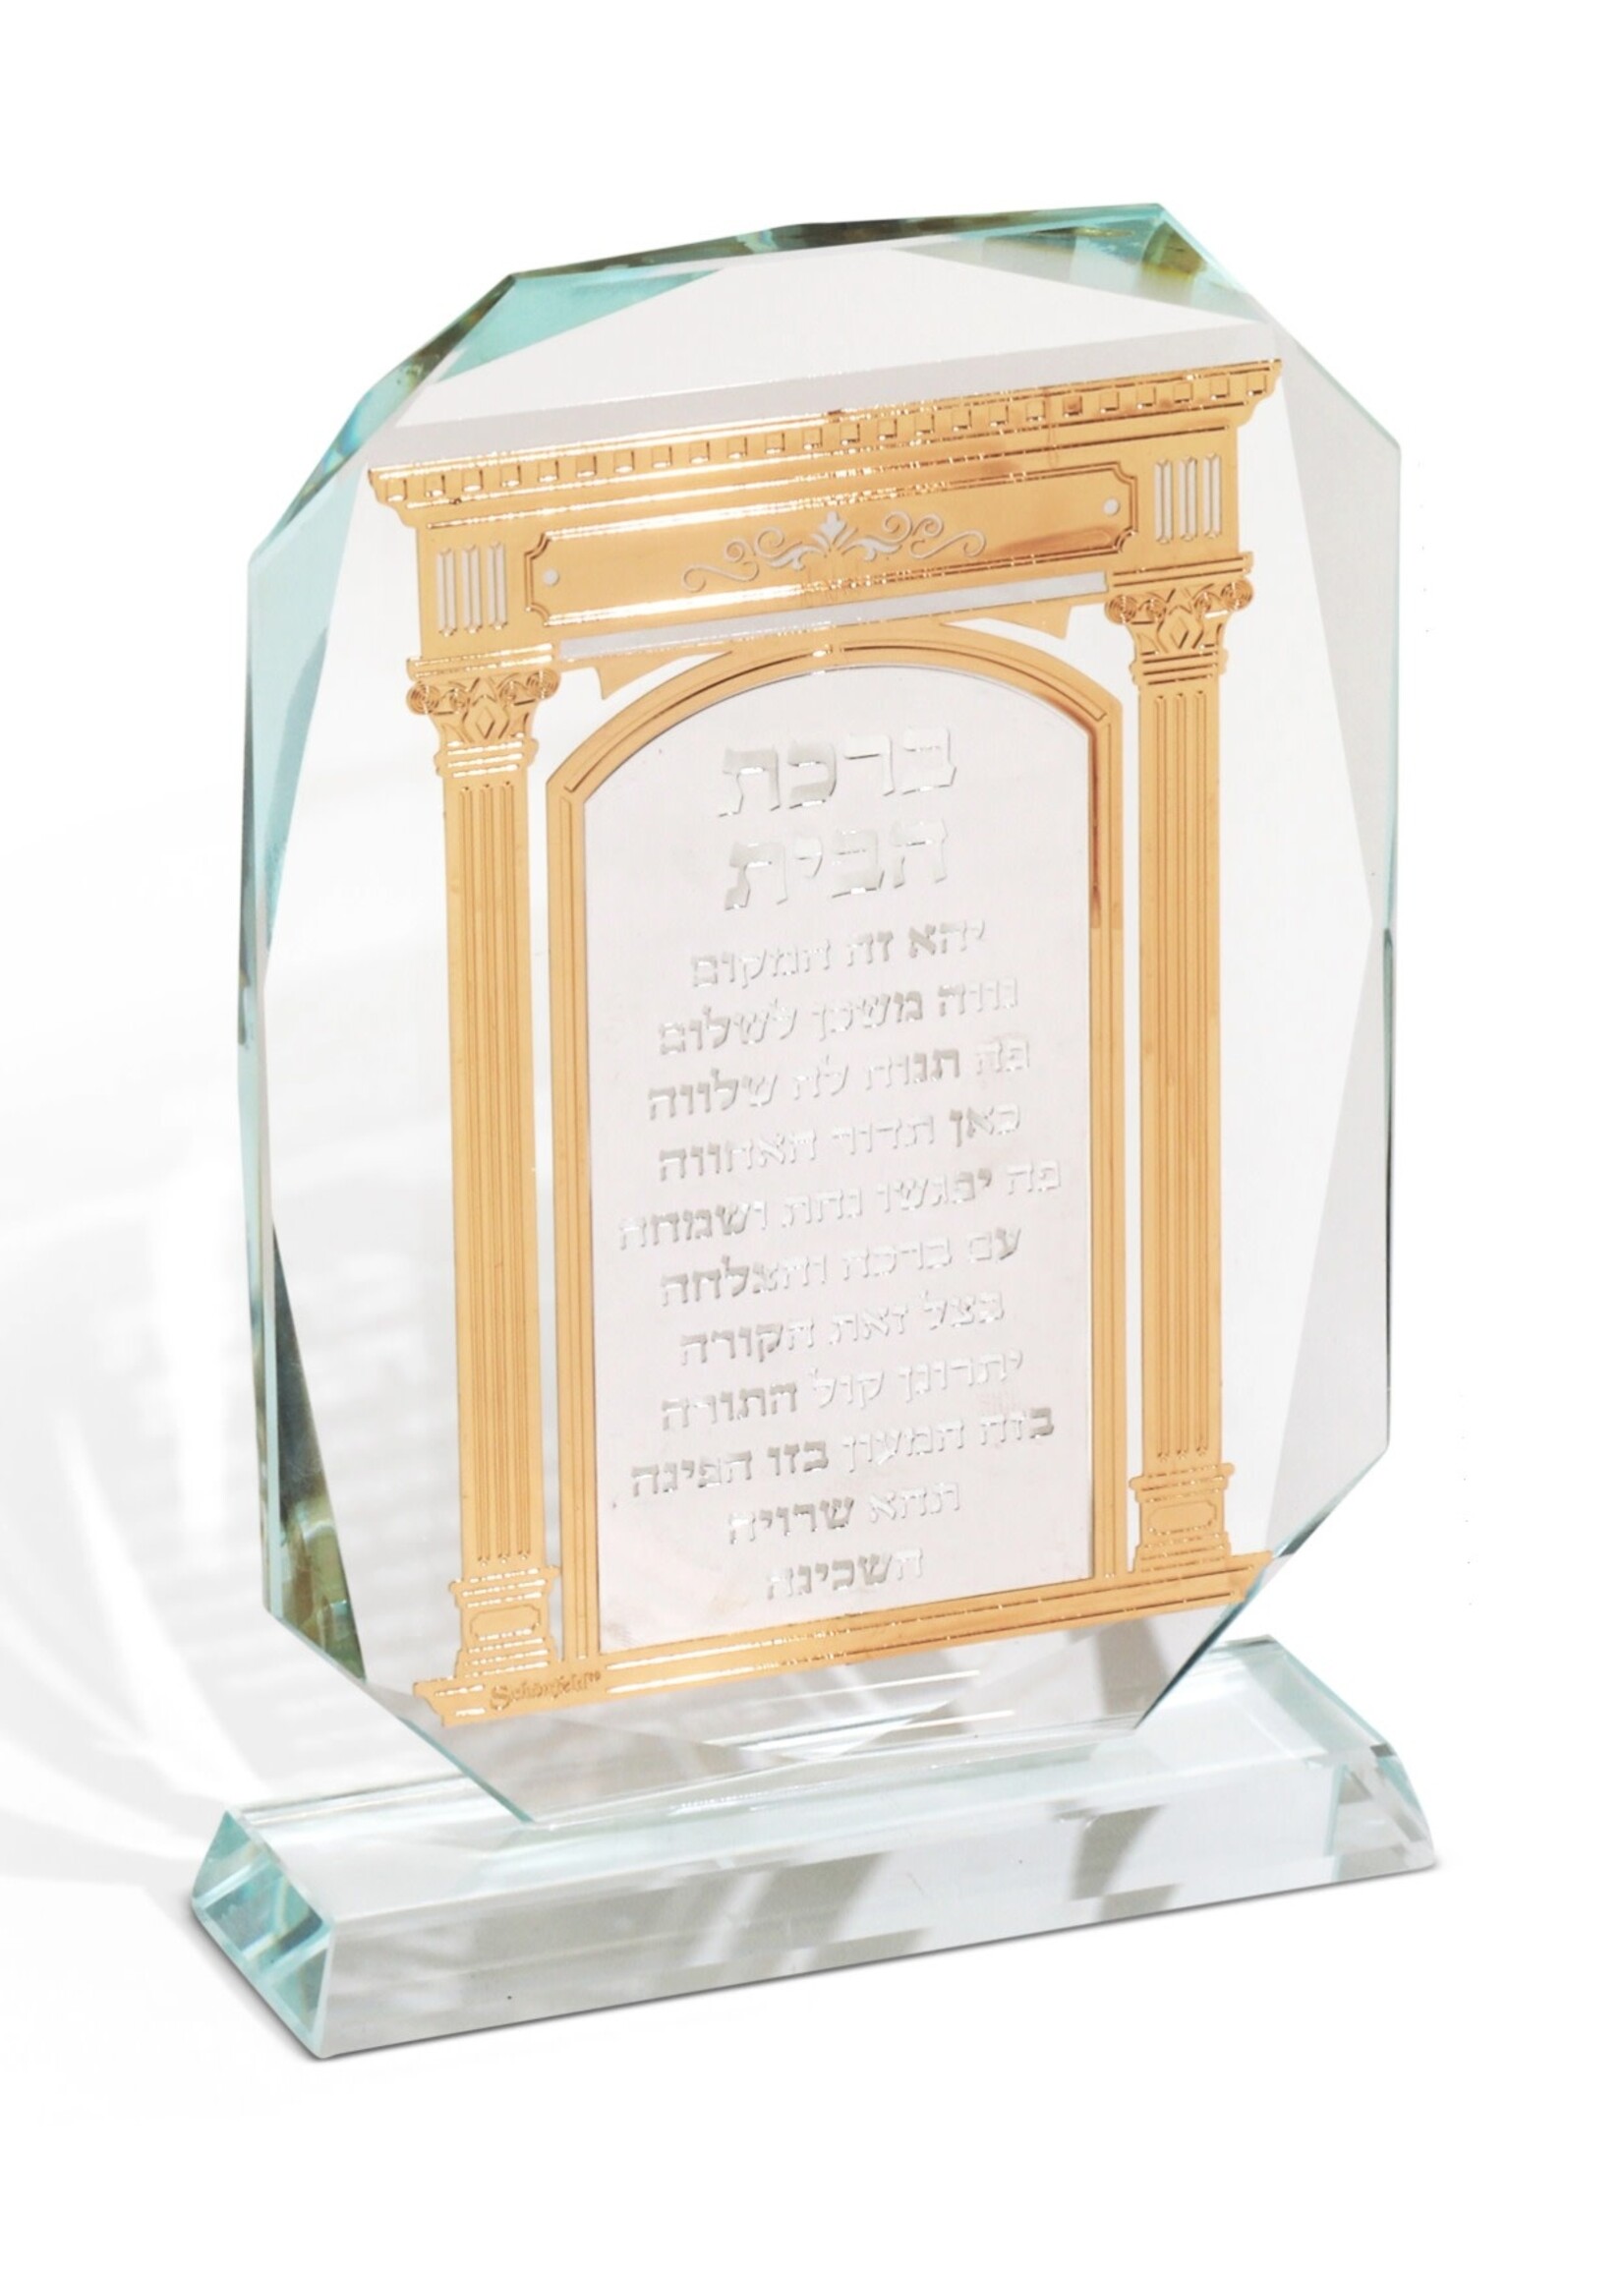 HOME BLESSING CRYSTAL & LASER CUT GOLD PLAQUE GATE